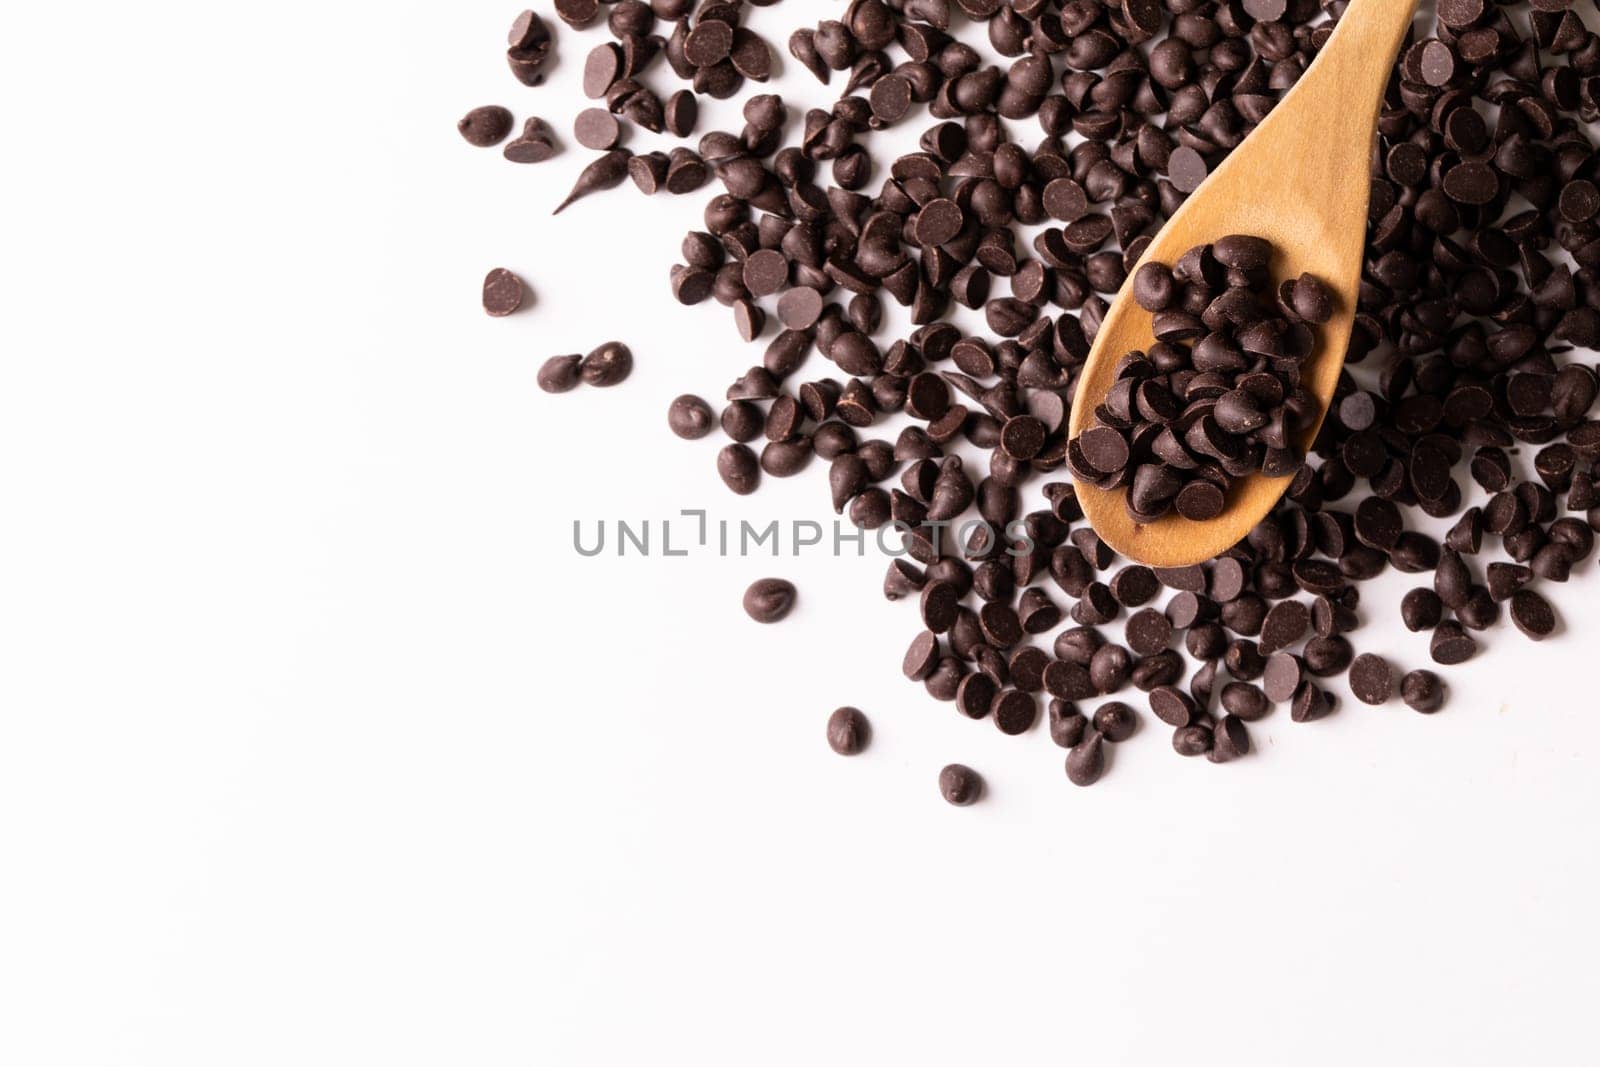 Overhead view of wooden spoon over fresh chocolate chips on white background with copy space. unaltered, sweet food and unhealthy eating concept.